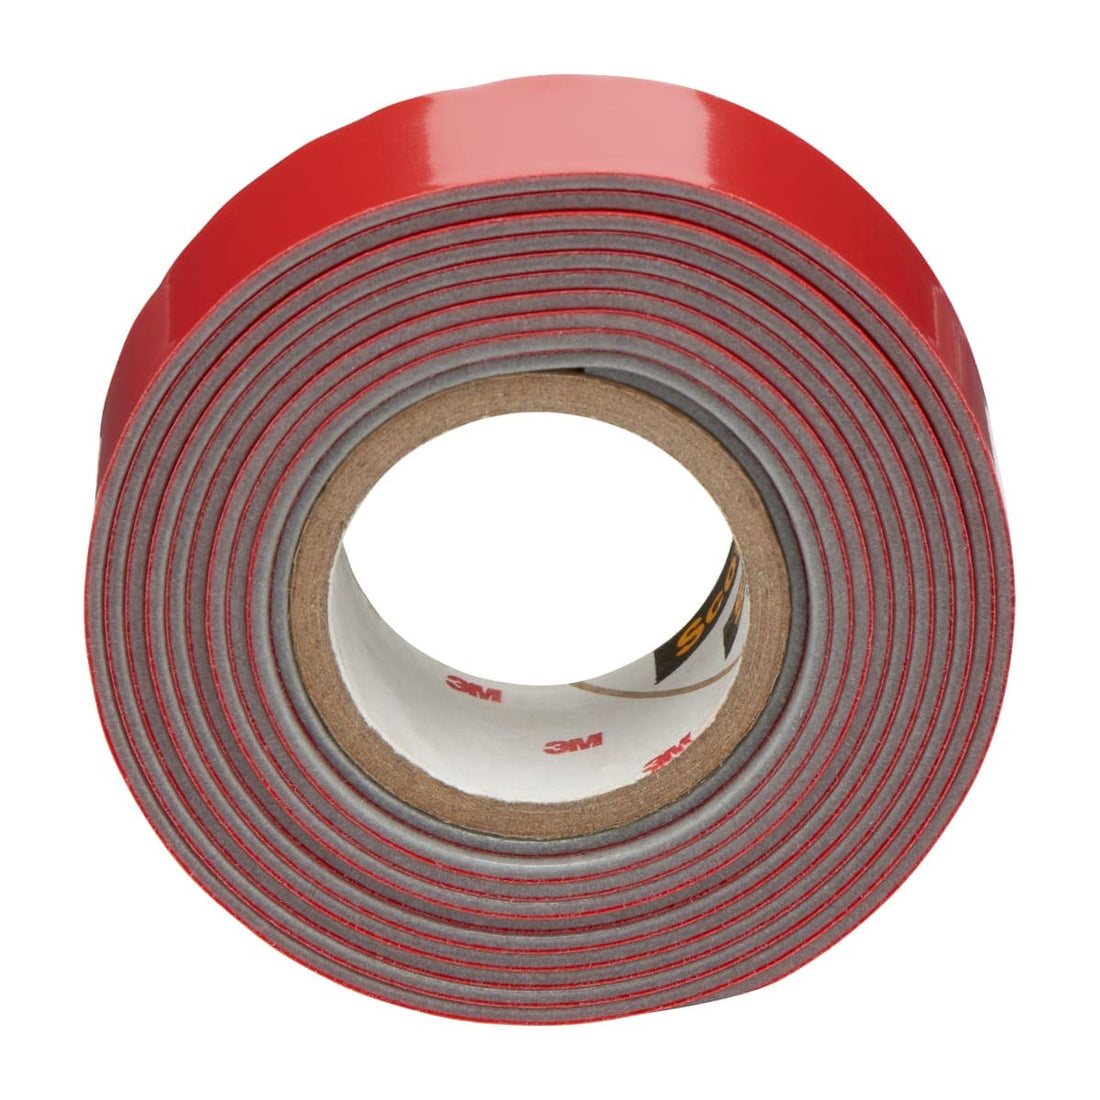 SCOTCH-FIXEXTREME FIXING TAPE UP TO 10 KG 19 MM X 1.5 M - best price from Maltashopper.com BR410007413